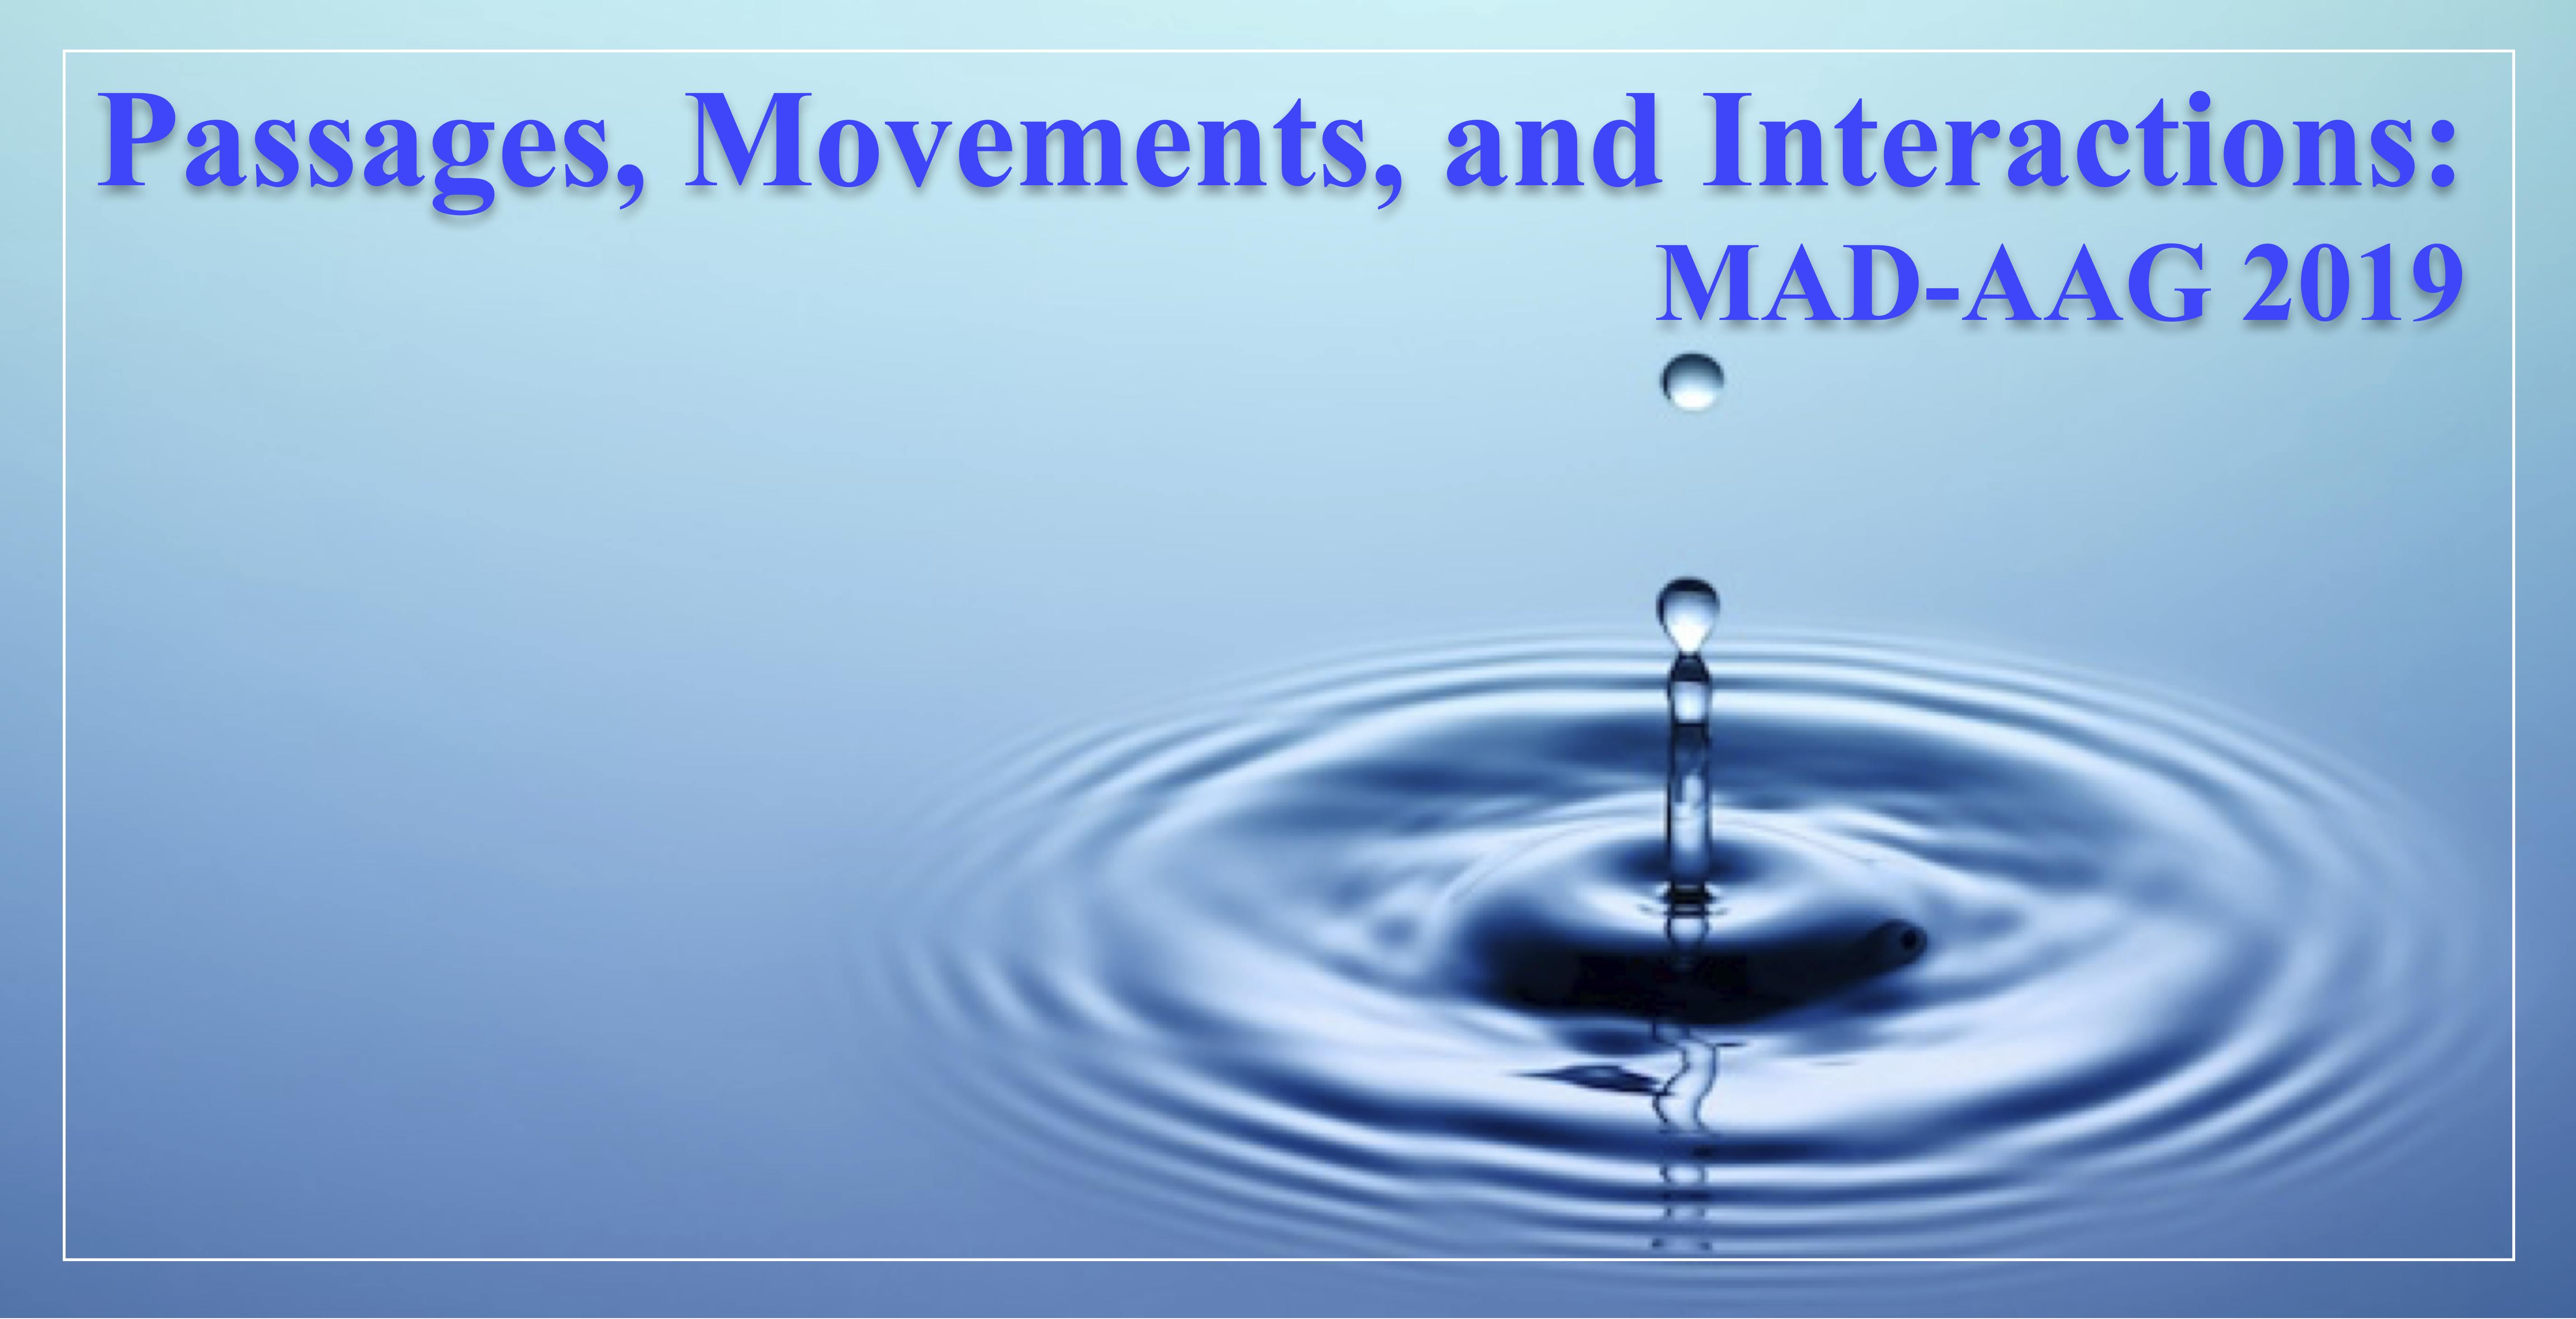 MAD-AAG 2019: Passages, Movements, and Interactions